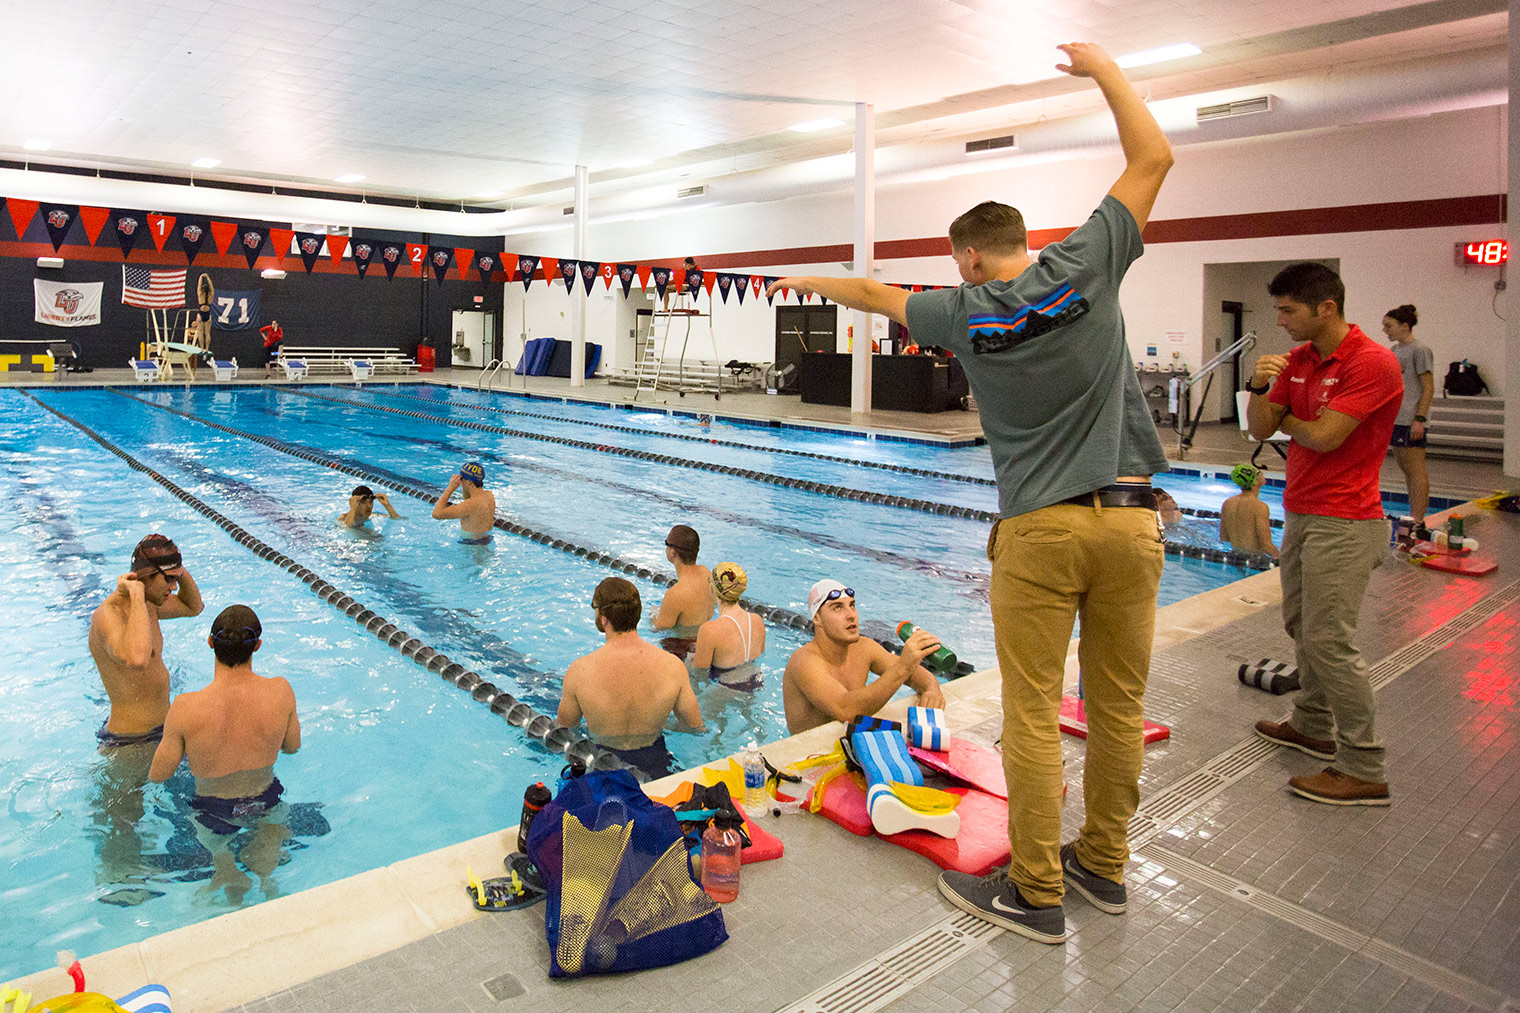 Mens swimming and diving team makes splash in first season, awaits new pool opening soon » Liberty News